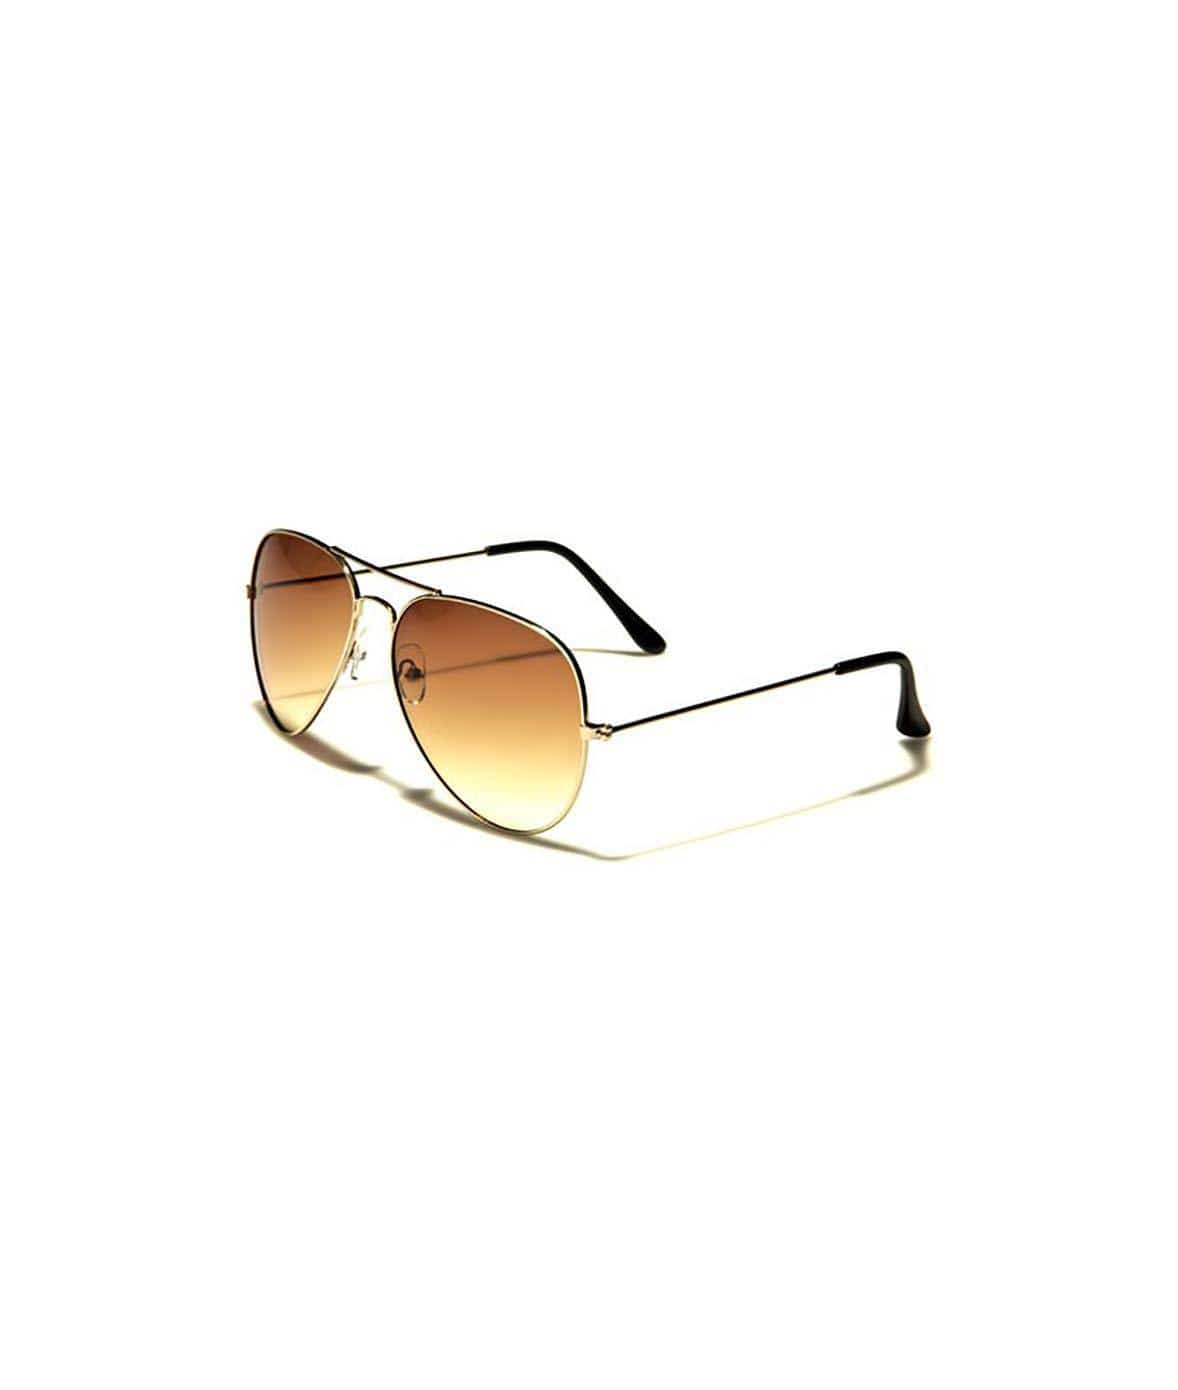 Nayked Apparel Women Women's Gold Aviator Sunglasses, Lifetime Guarantee One-Size / Dark Pink/Gold / NAY-S-W-AF101-GDGC